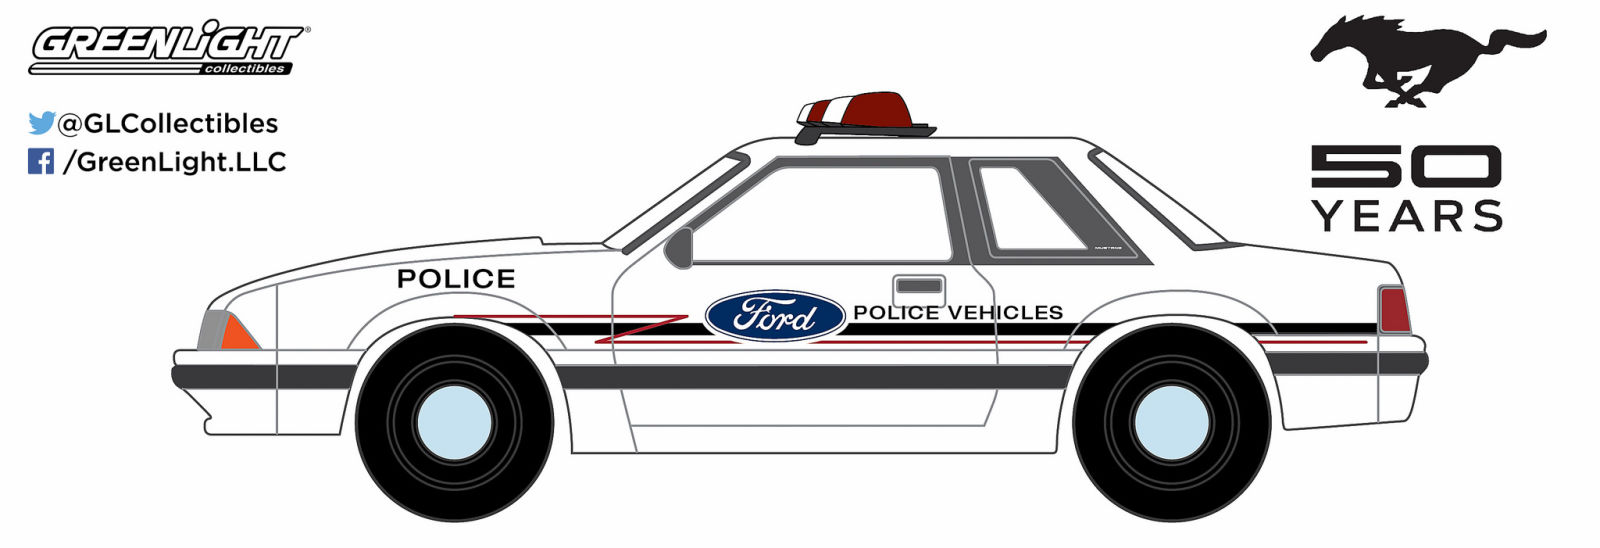 Illustration for article titled Greenlight: So You Like Police Cars...